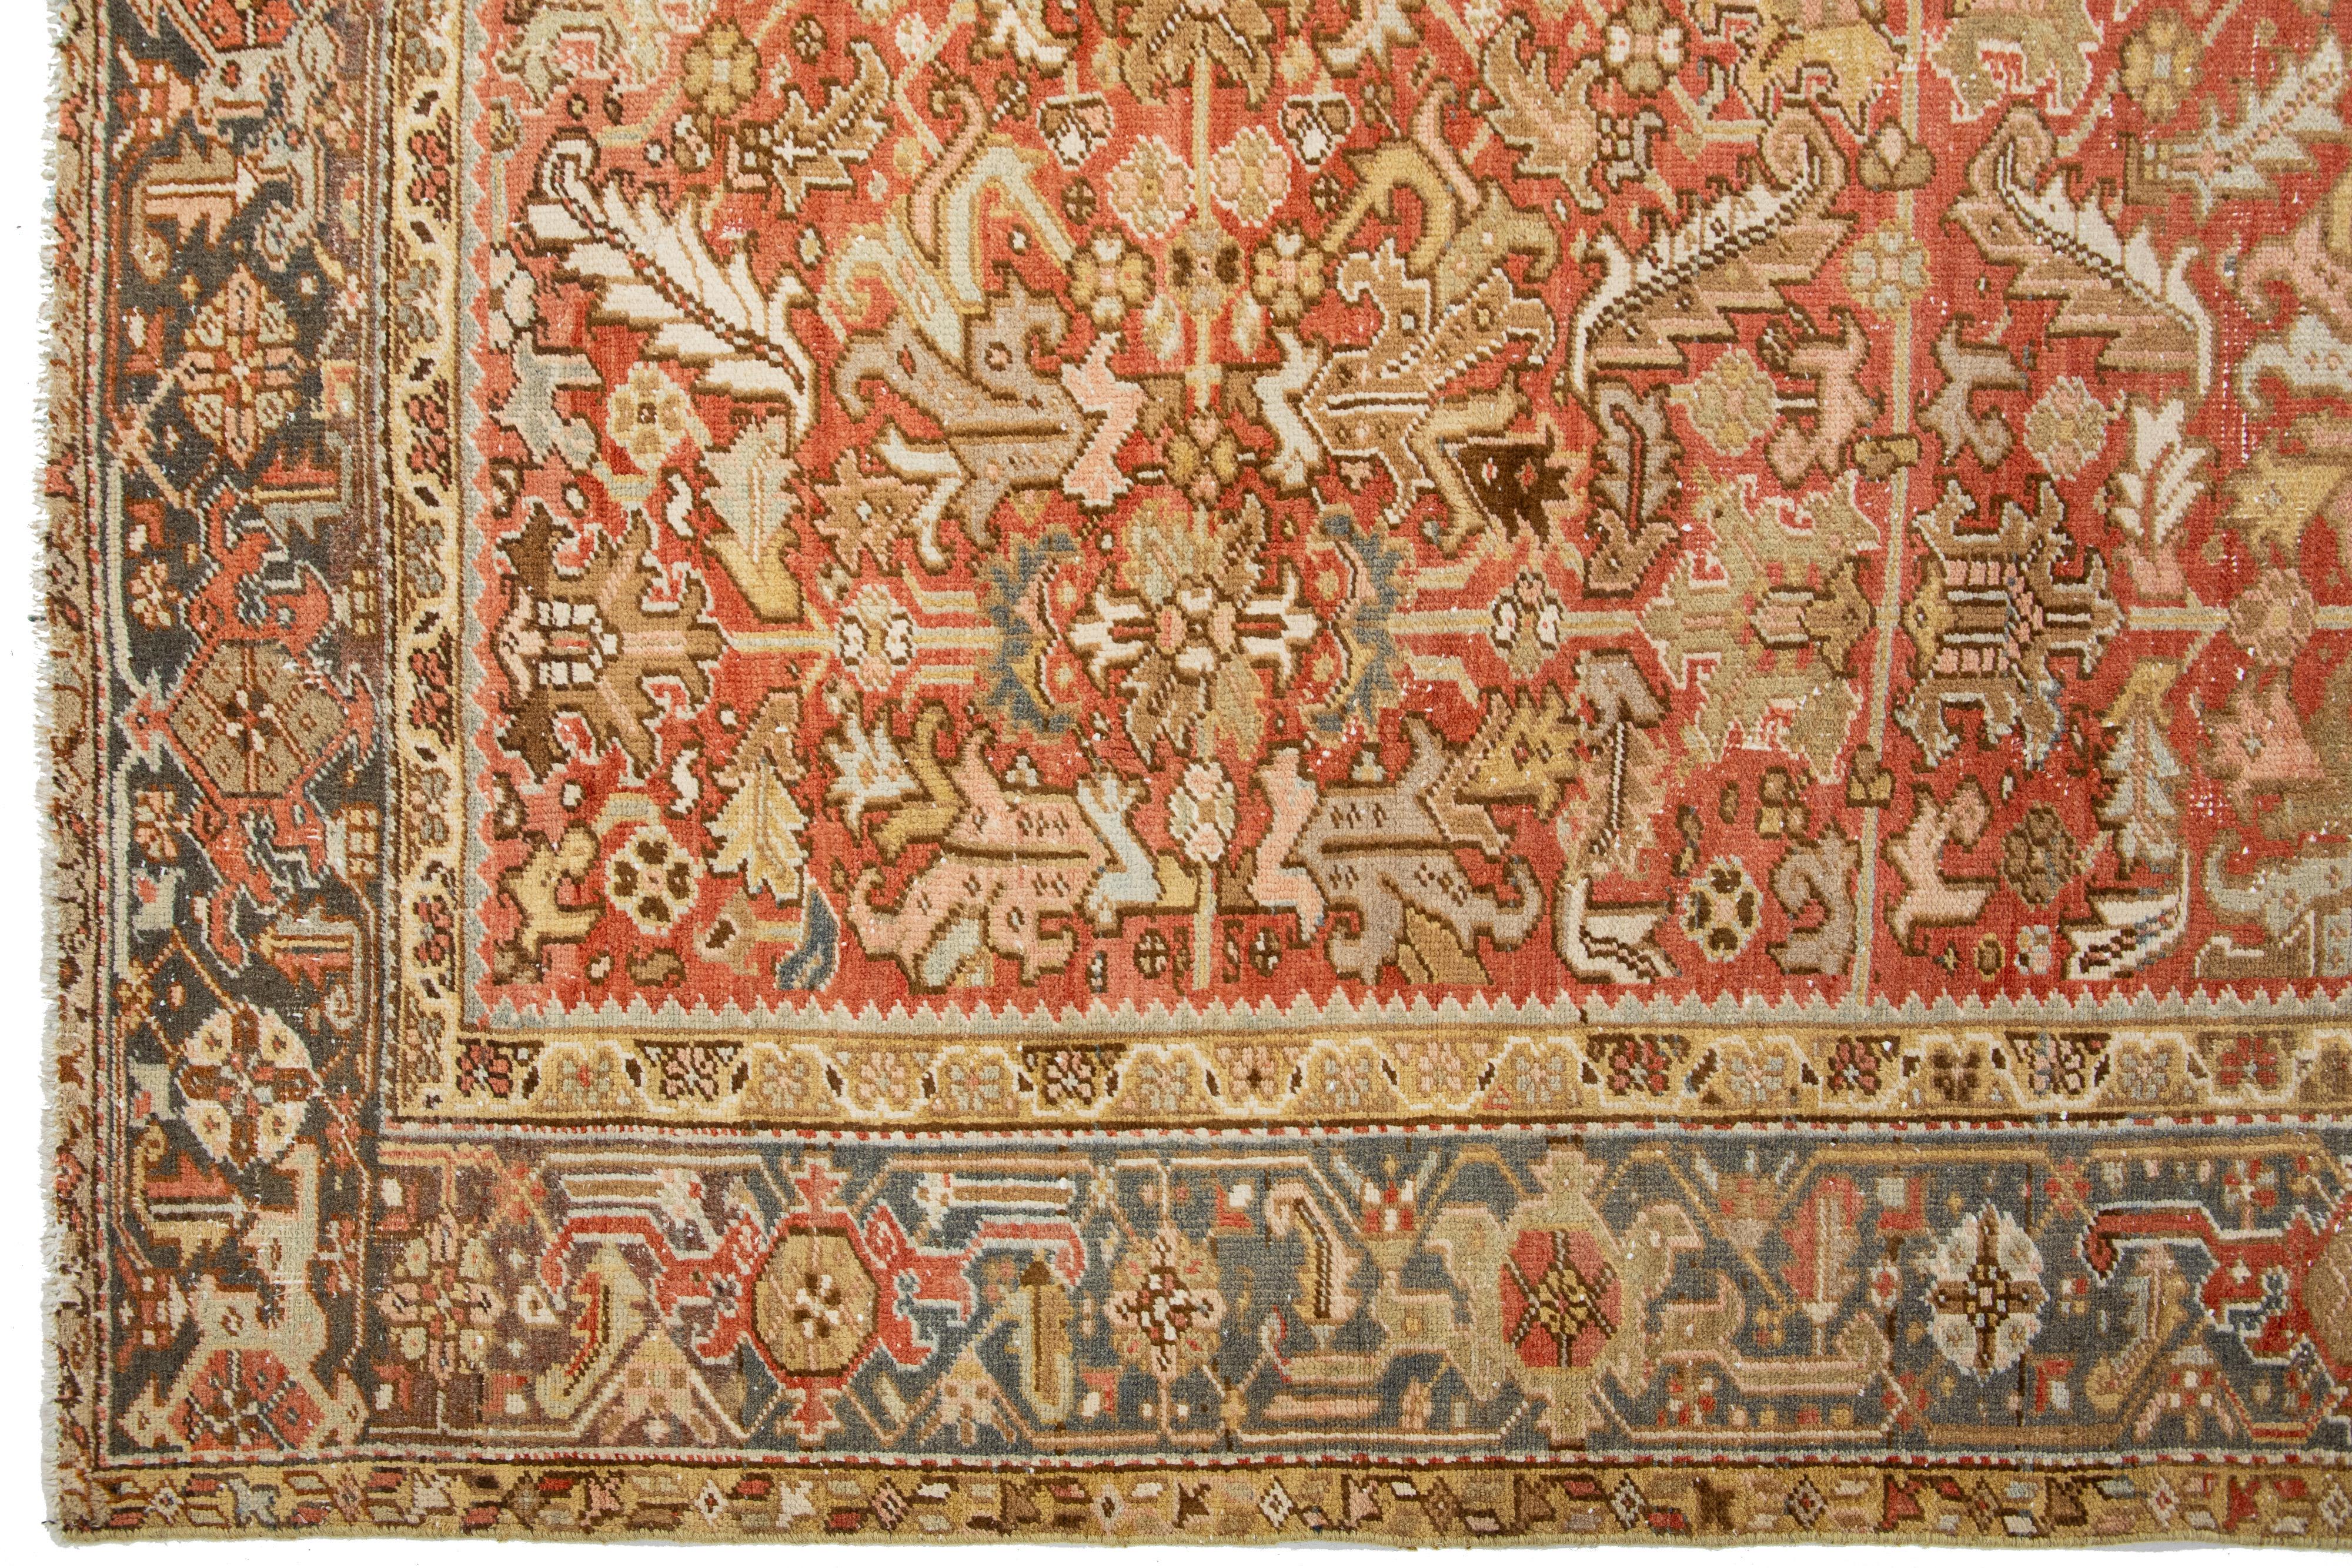 Allover Antique Persian Heriz Wool Rug In Rust Color From The 1920s In Good Condition For Sale In Norwalk, CT